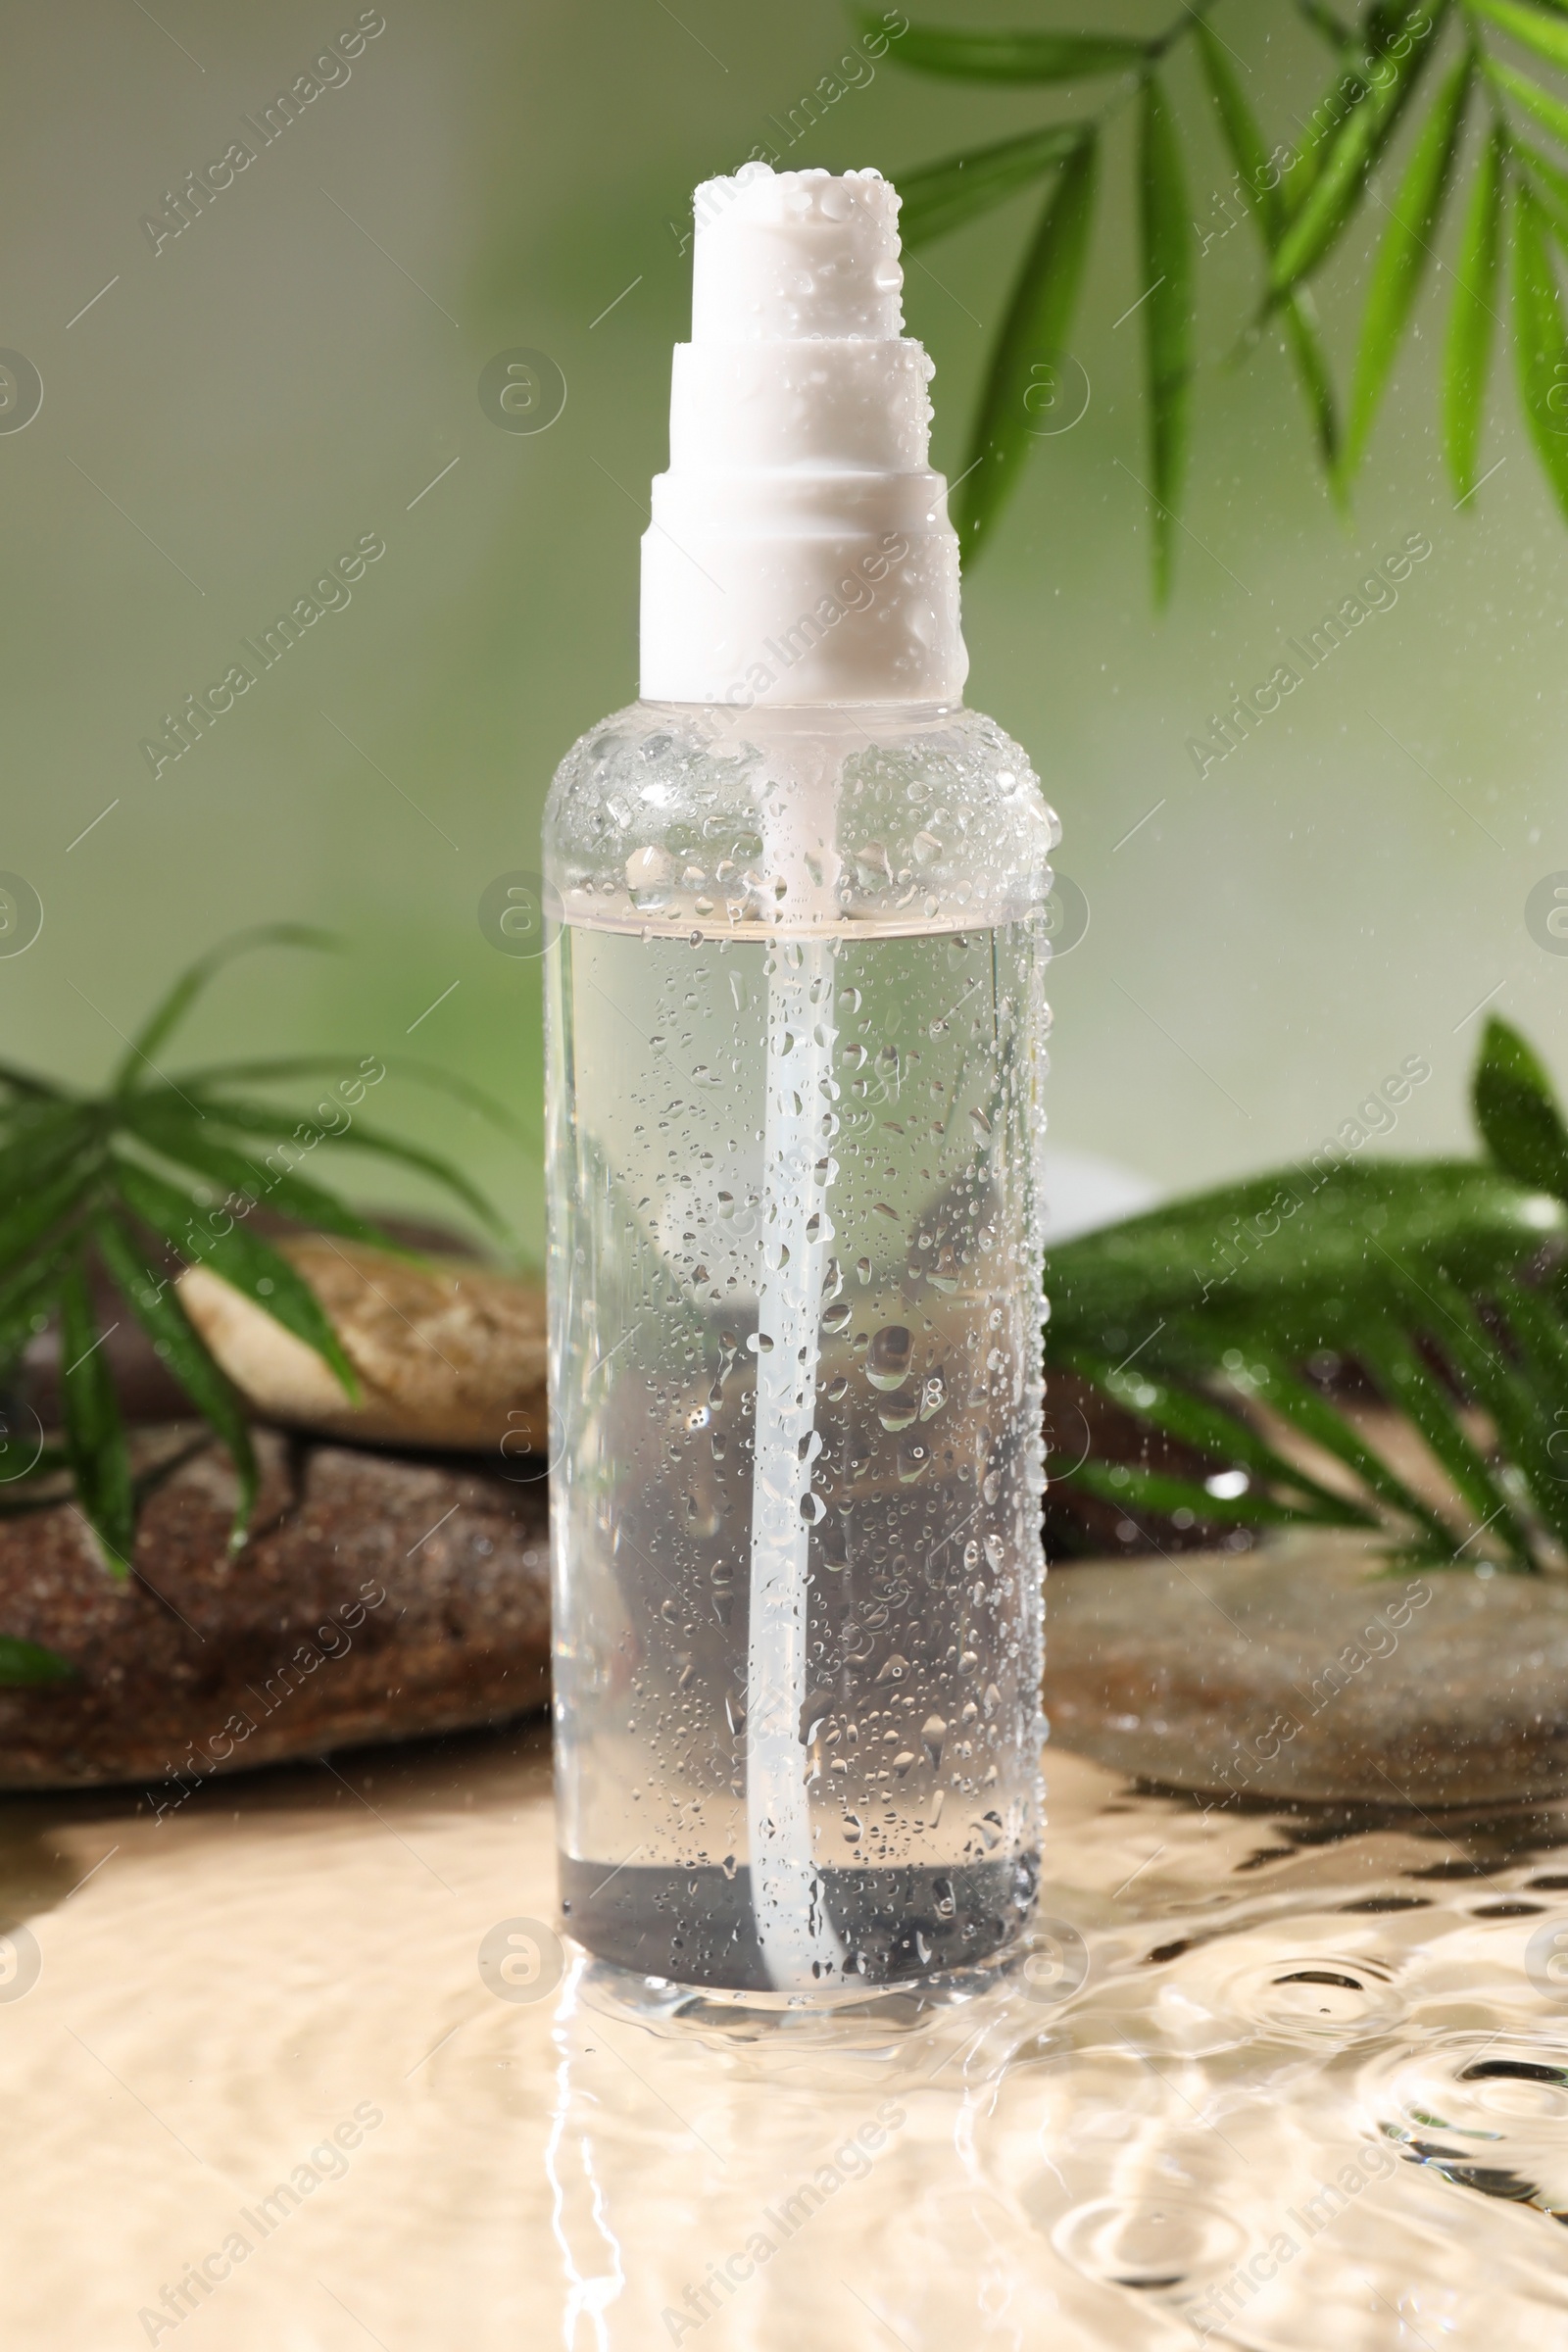 Photo of Wet bottle of micellar water, leaves and spa stones against green background